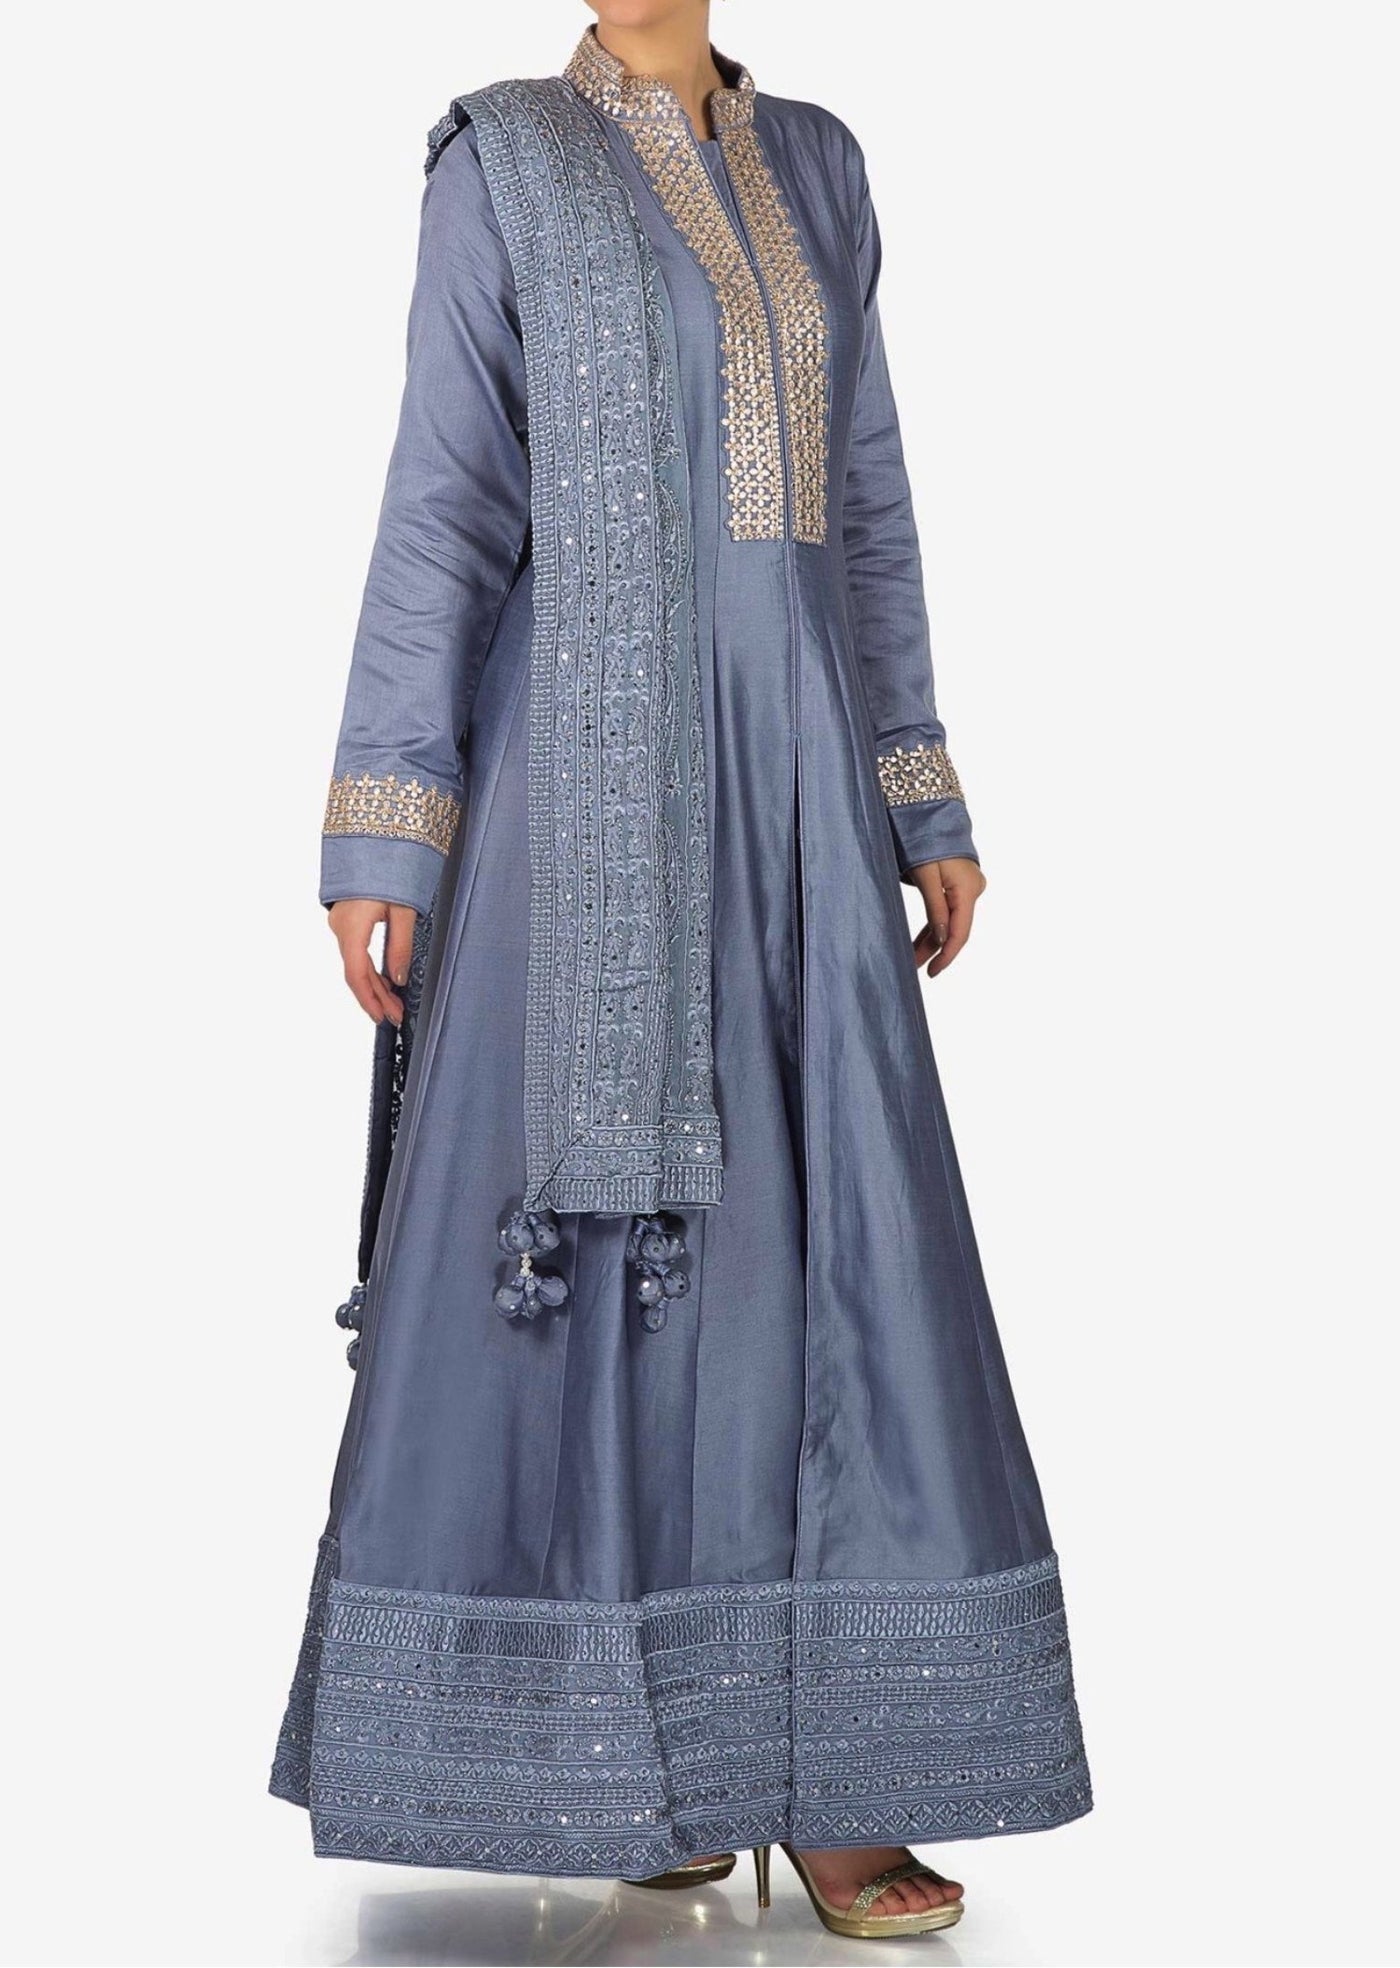 Lavender blue anarkali suit in silk with embroidered placket - Indian Clothing in Denver, CO, Aurora, CO, Boulder, CO, Fort Collins, CO, Colorado Springs, CO, Parker, CO, Highlands Ranch, CO, Cherry Creek, CO, Centennial, CO, and Longmont, CO. Nationwide shipping USA - India Fashion X